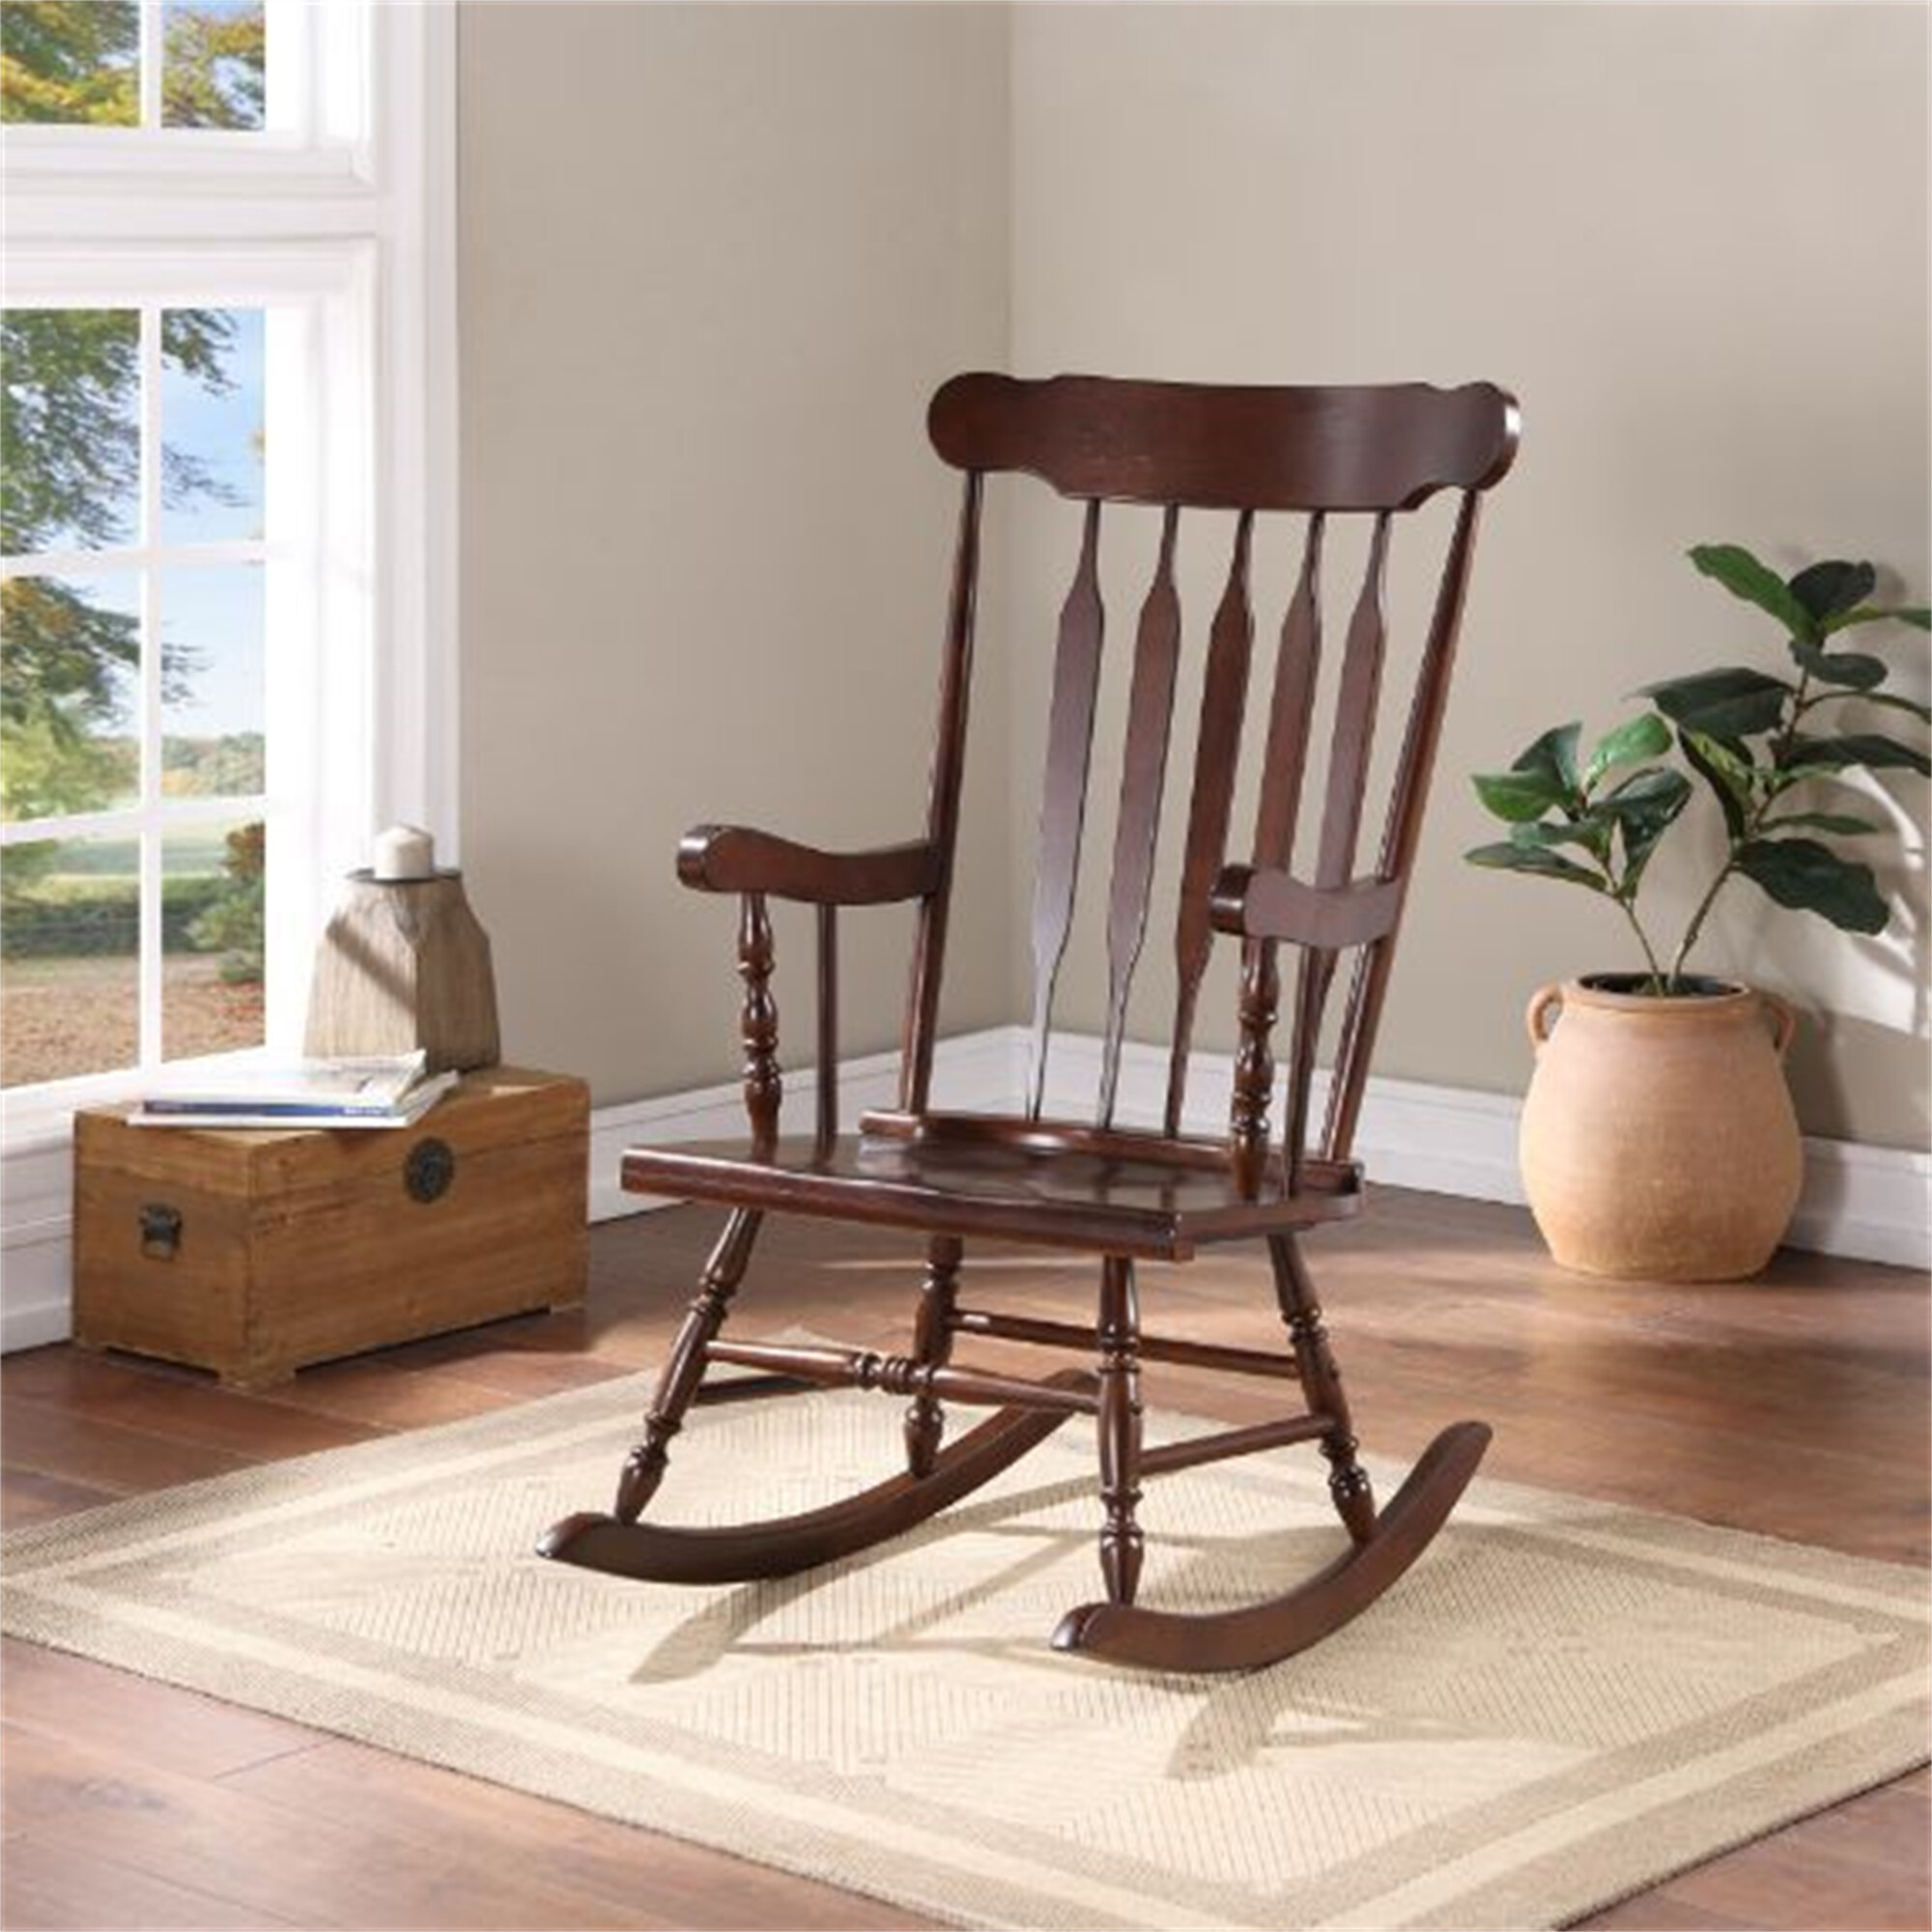 Vintage Rocking Chair for Legs/wooden Rocking Footstool